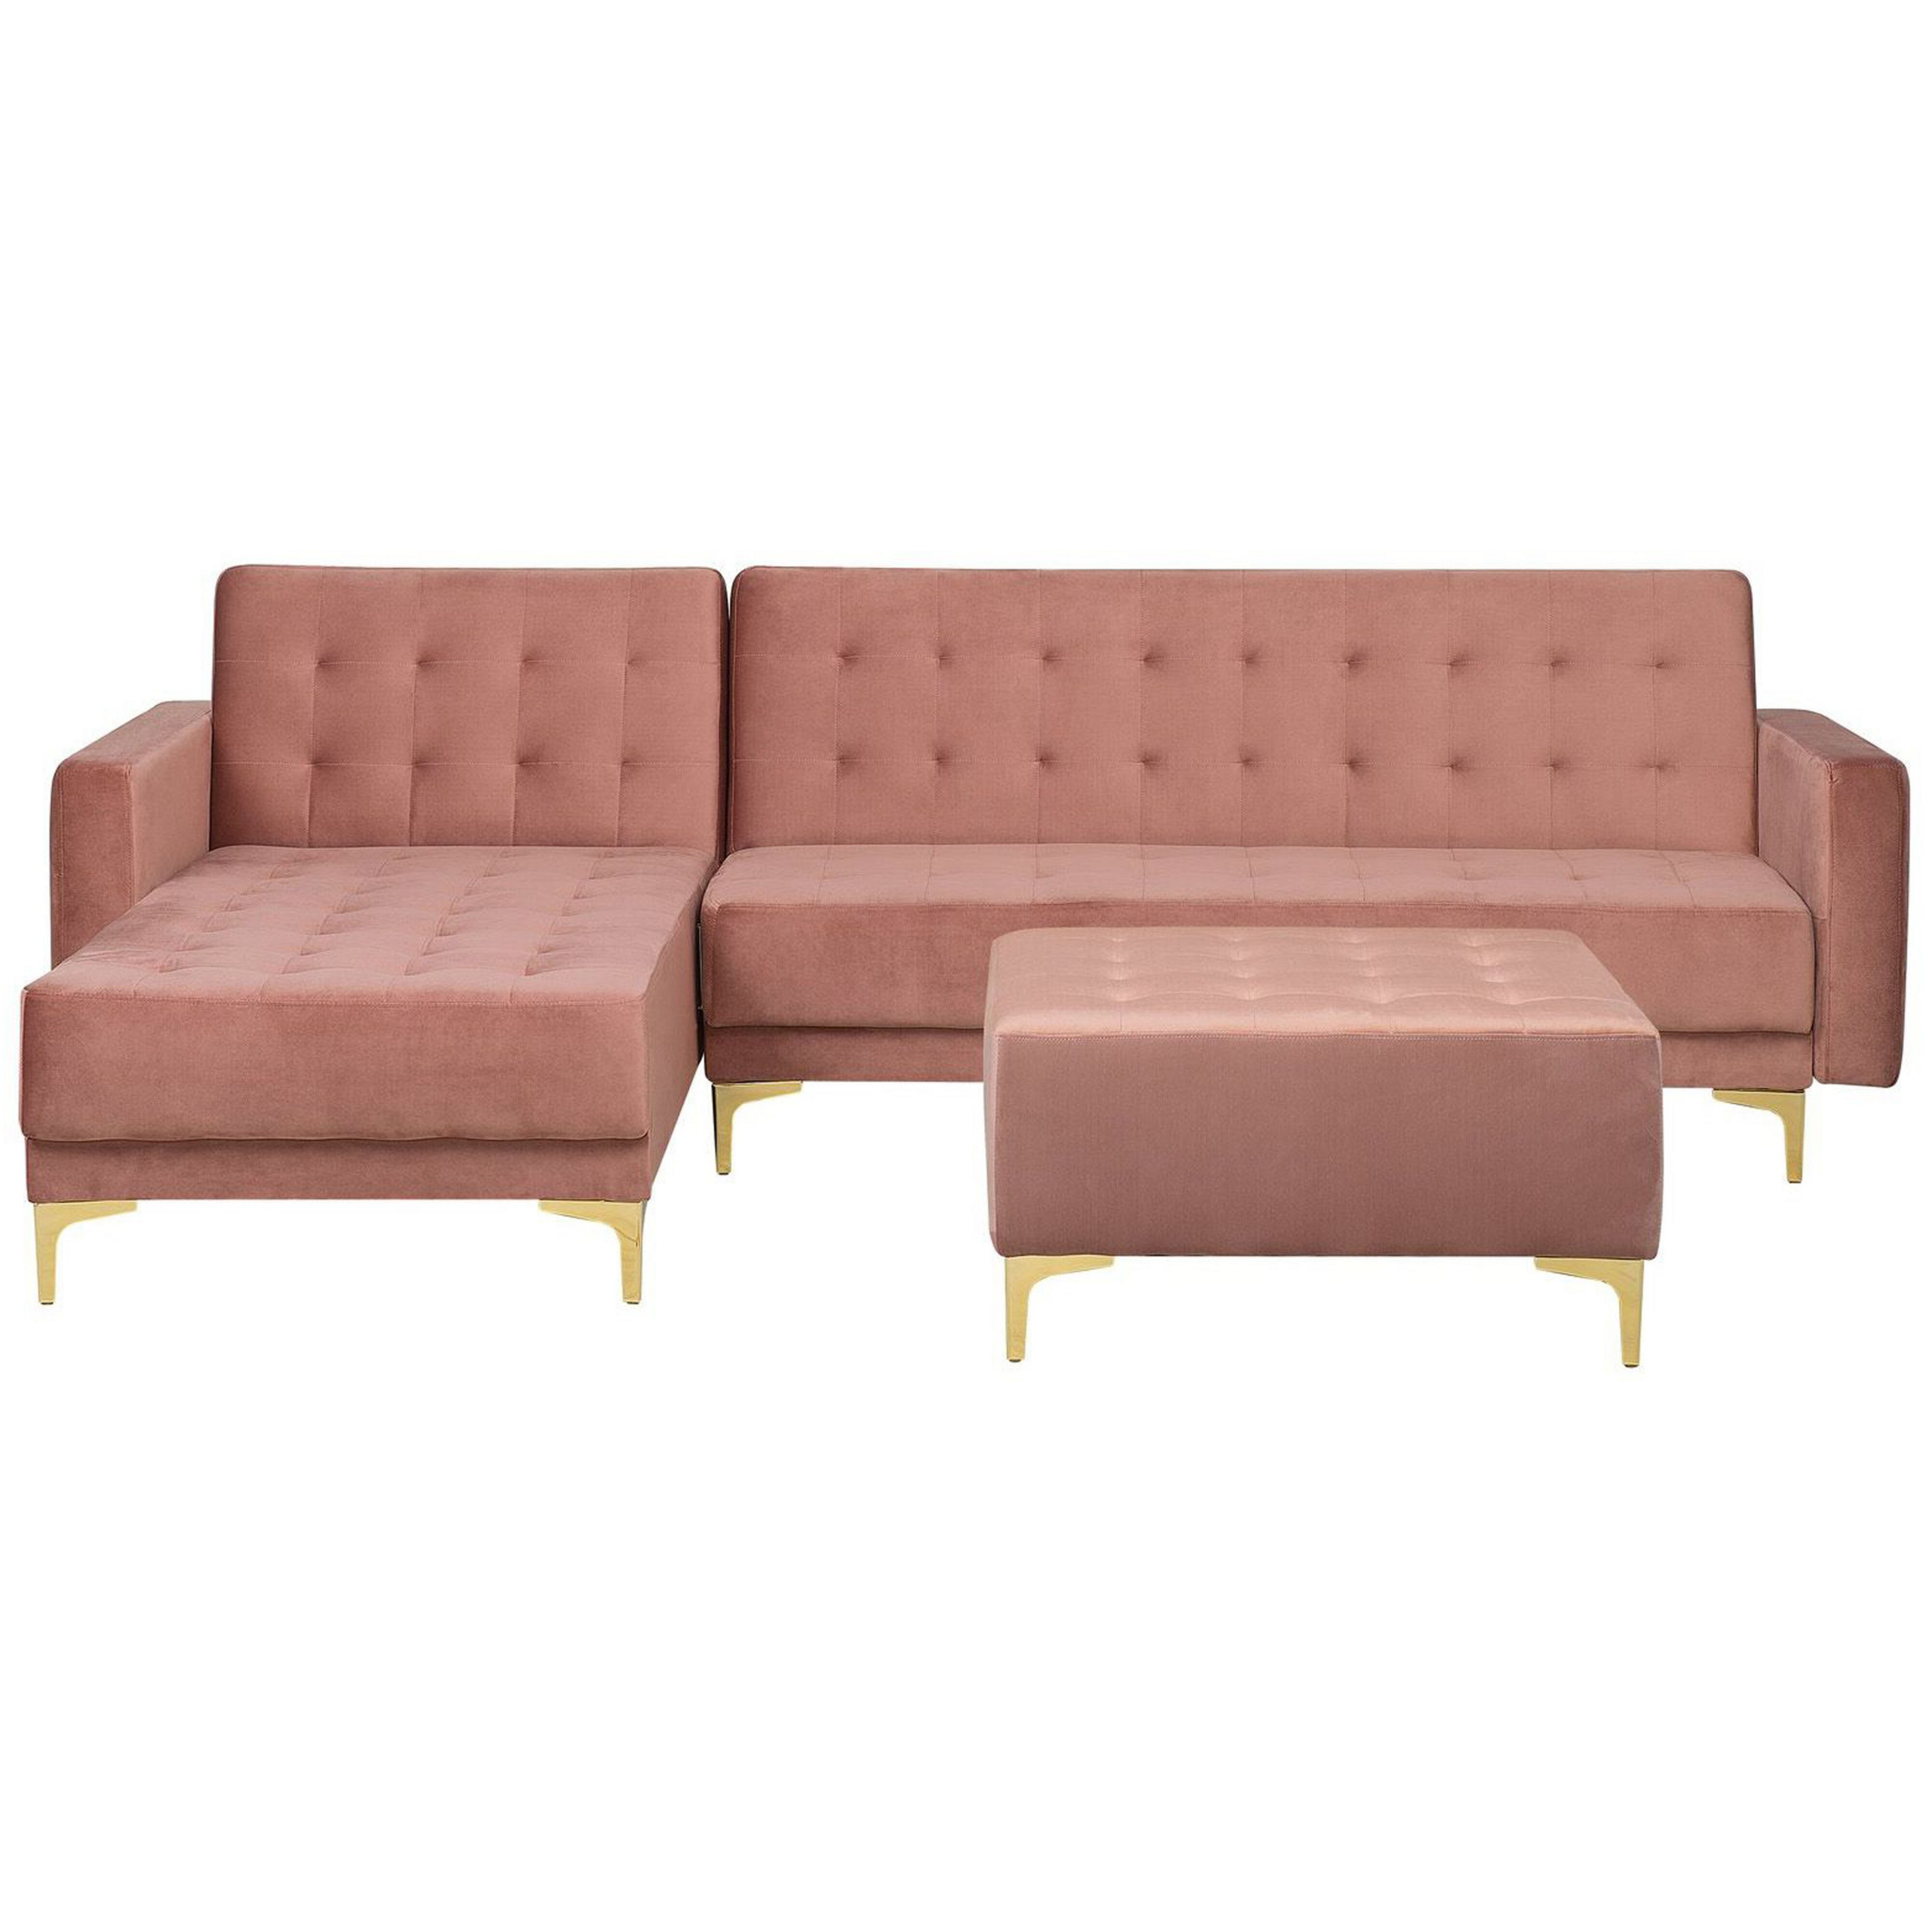 Beliani Corner Sofa Bed Pink Velvet Tufted Fabric Modern L-Shaped Modular 4 Seater with Ottoman Right Hand Chaise Longue